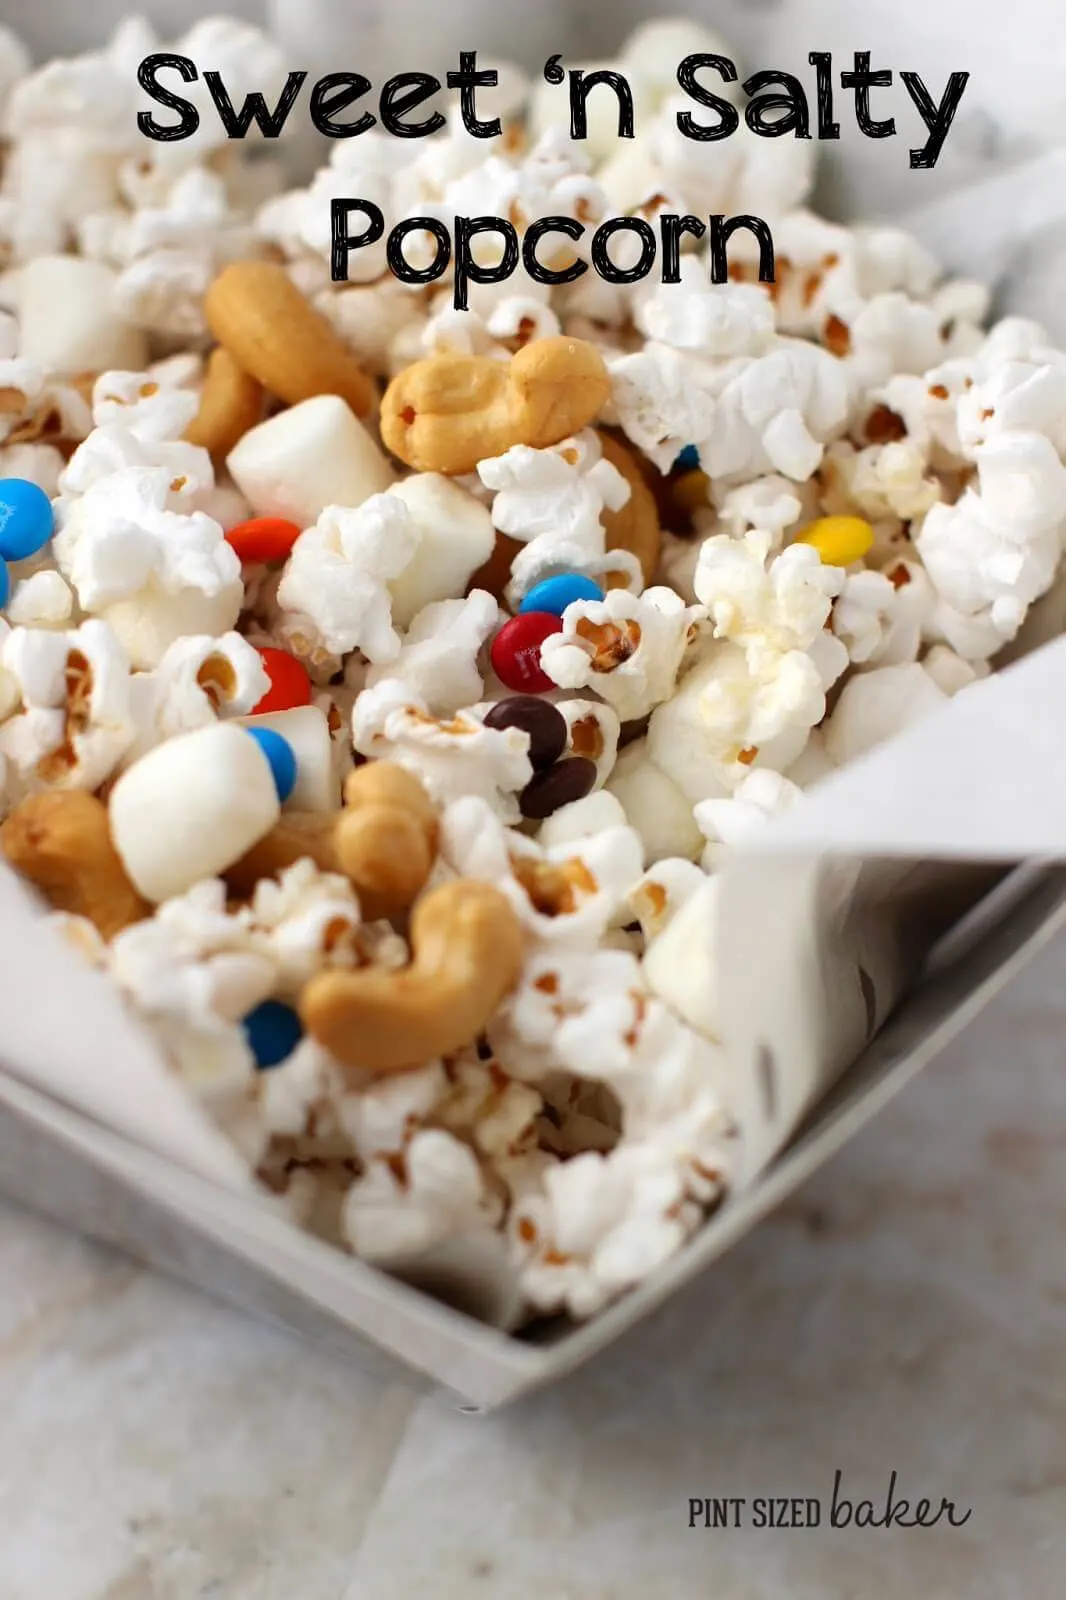 Enjoy some Sweet and Salty popcorn with mini M&M's, mini marshmallows and some salty cashews.